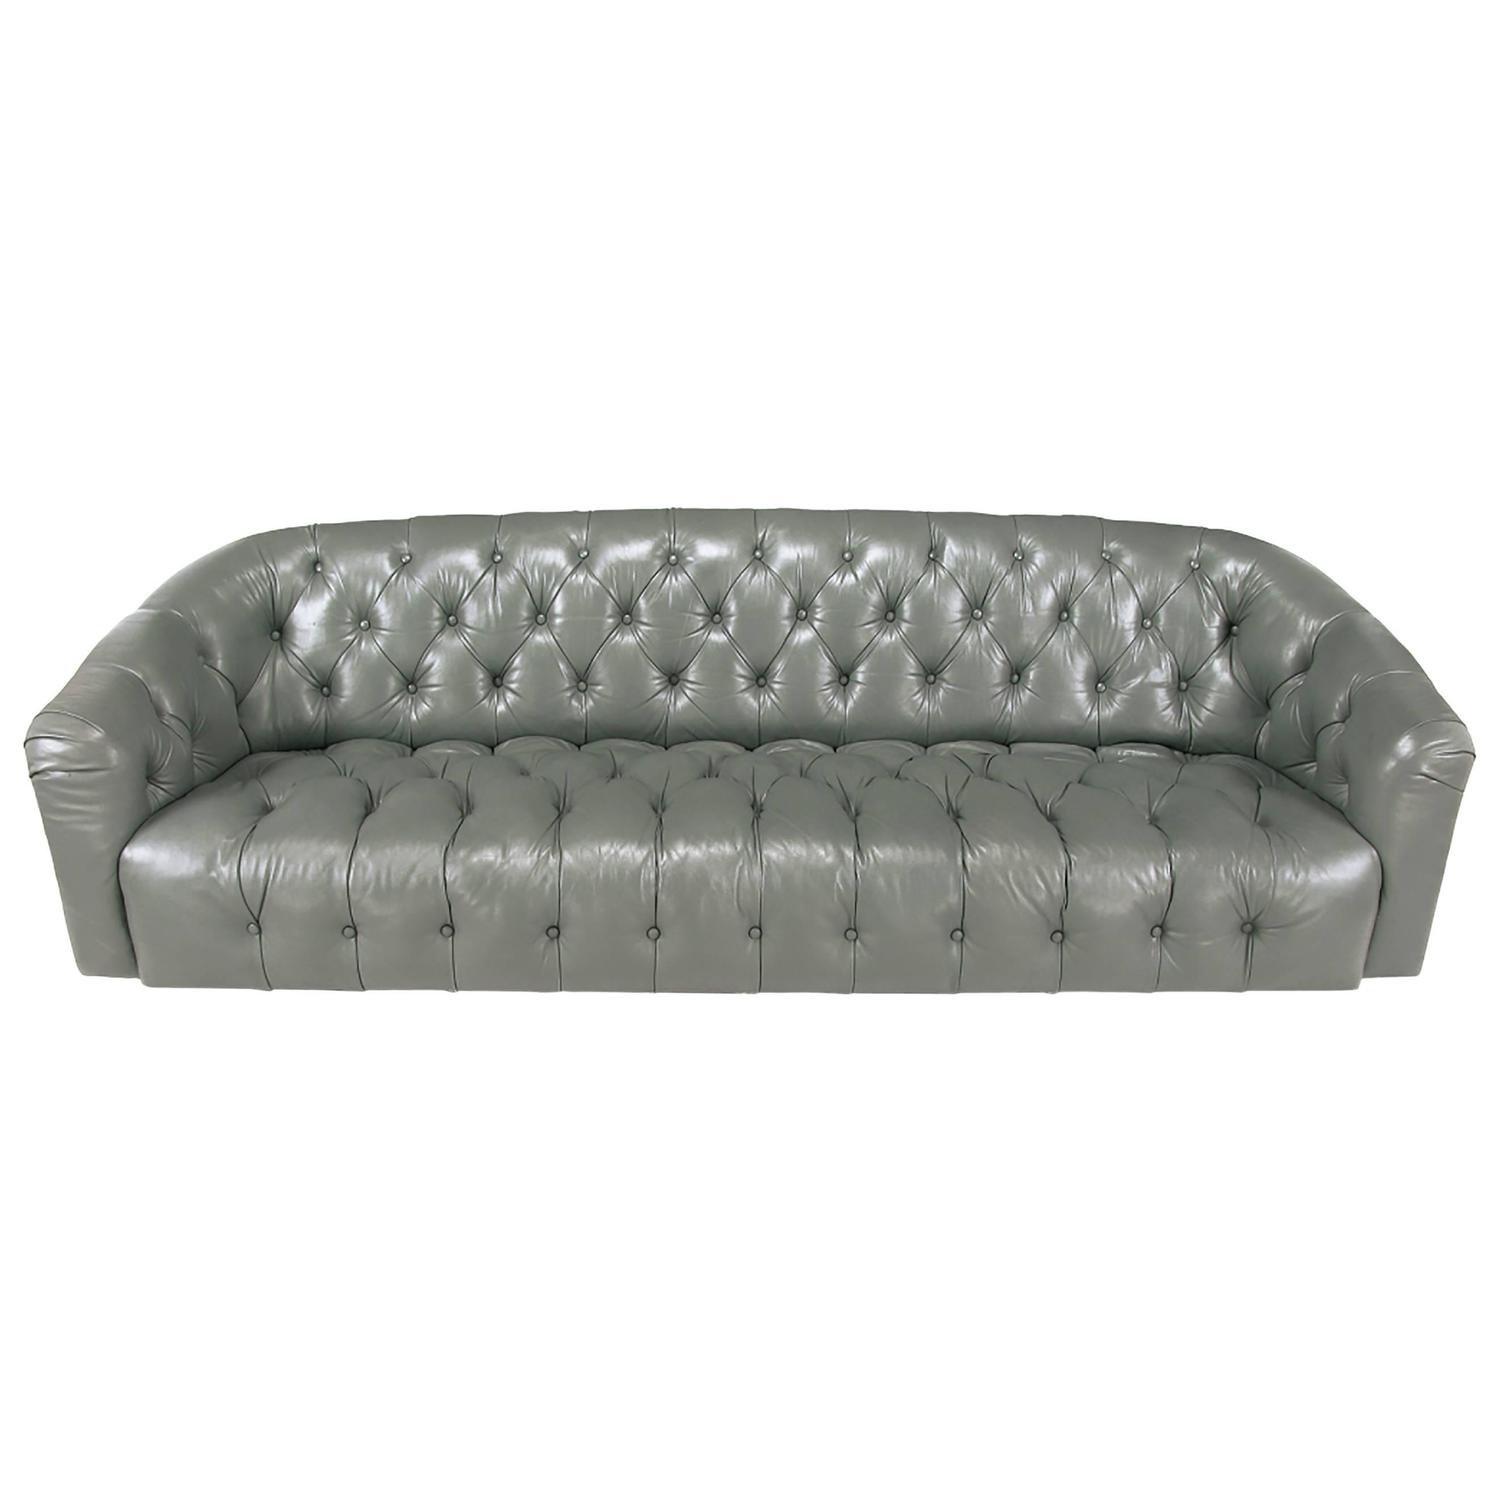 Baker Slate Grey Button Tufted Leather Sofa For Sale at 1stdibs